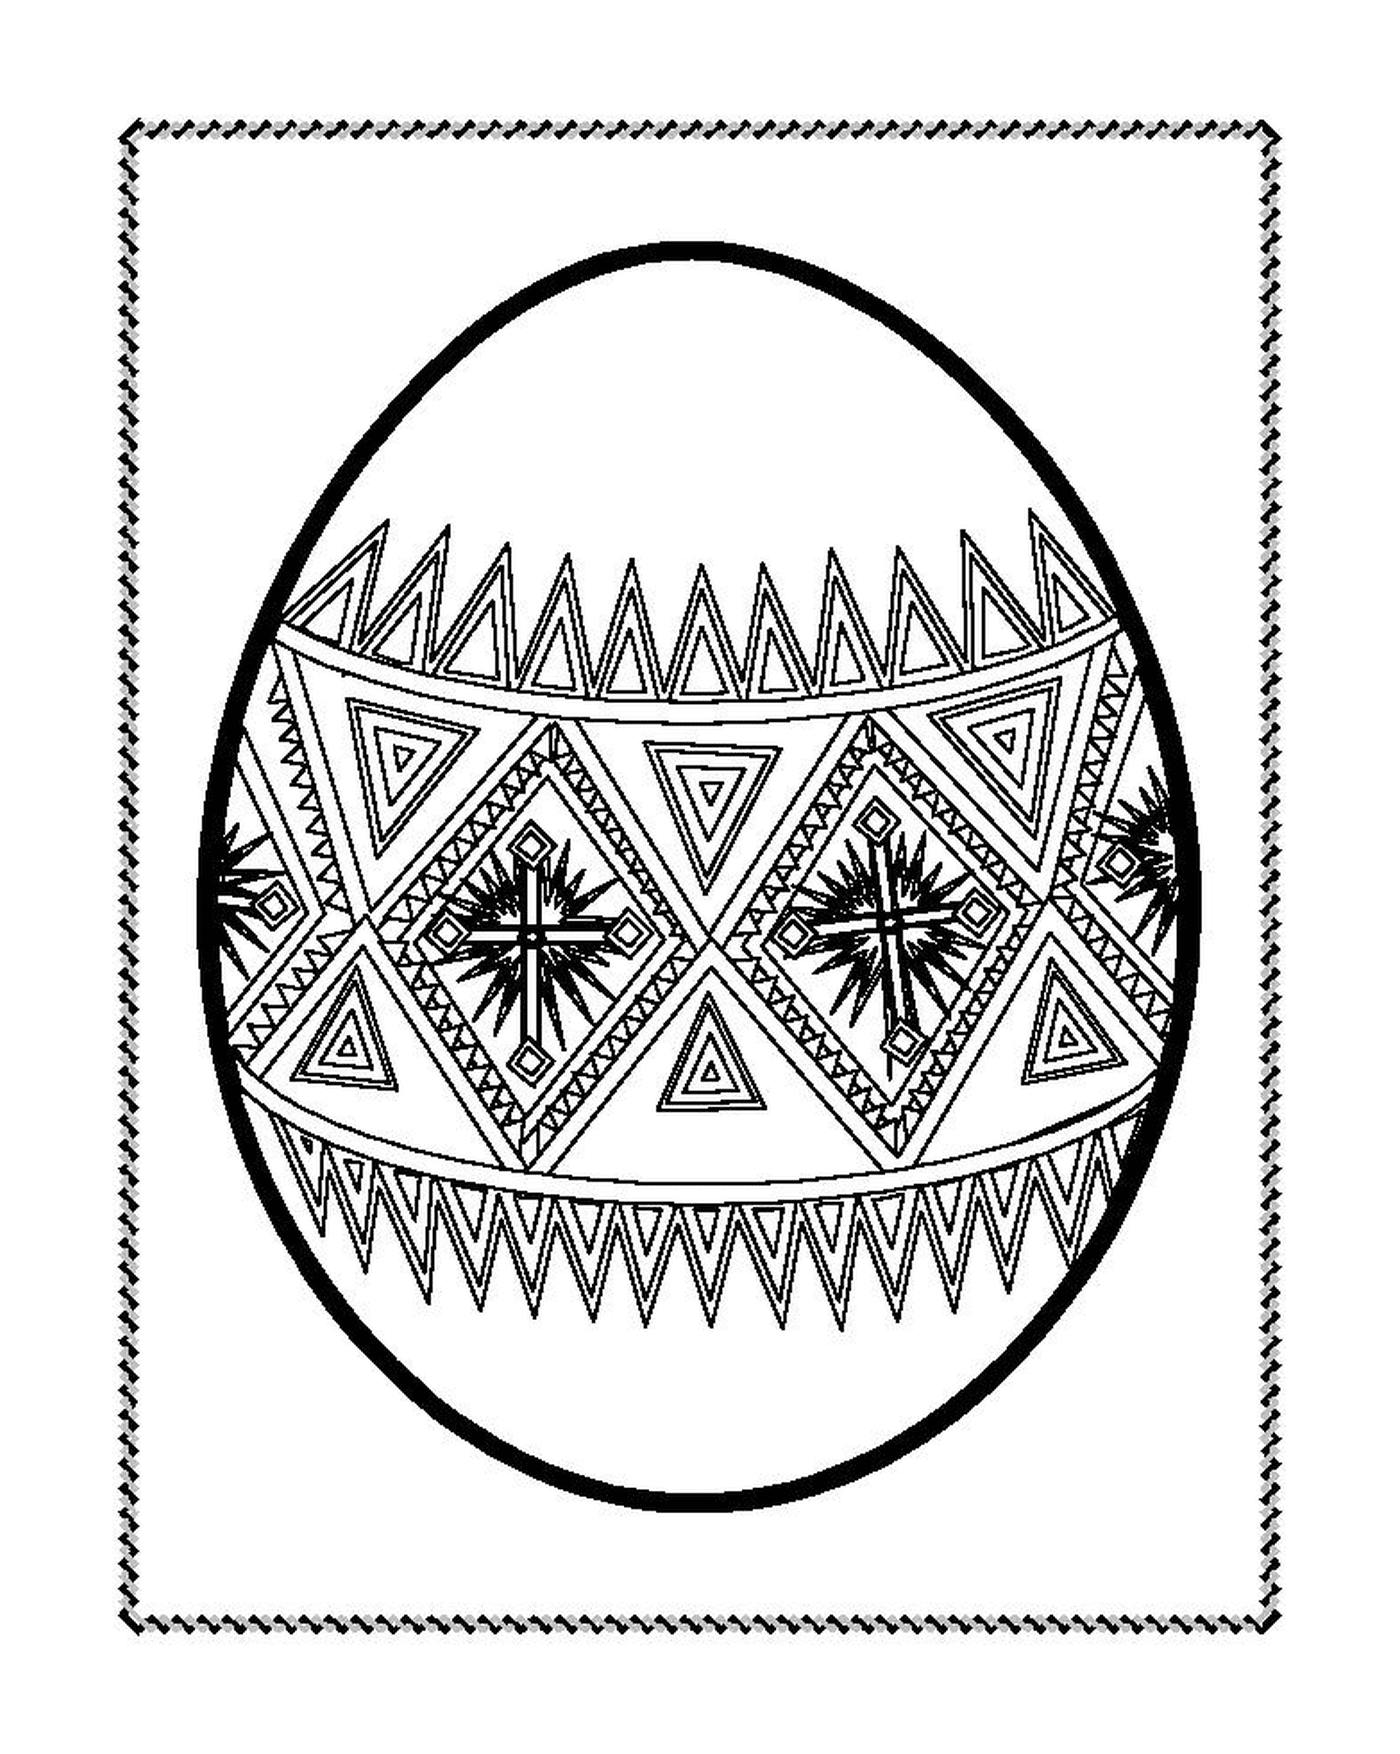  An Easter egg decorated with geometric motifs 